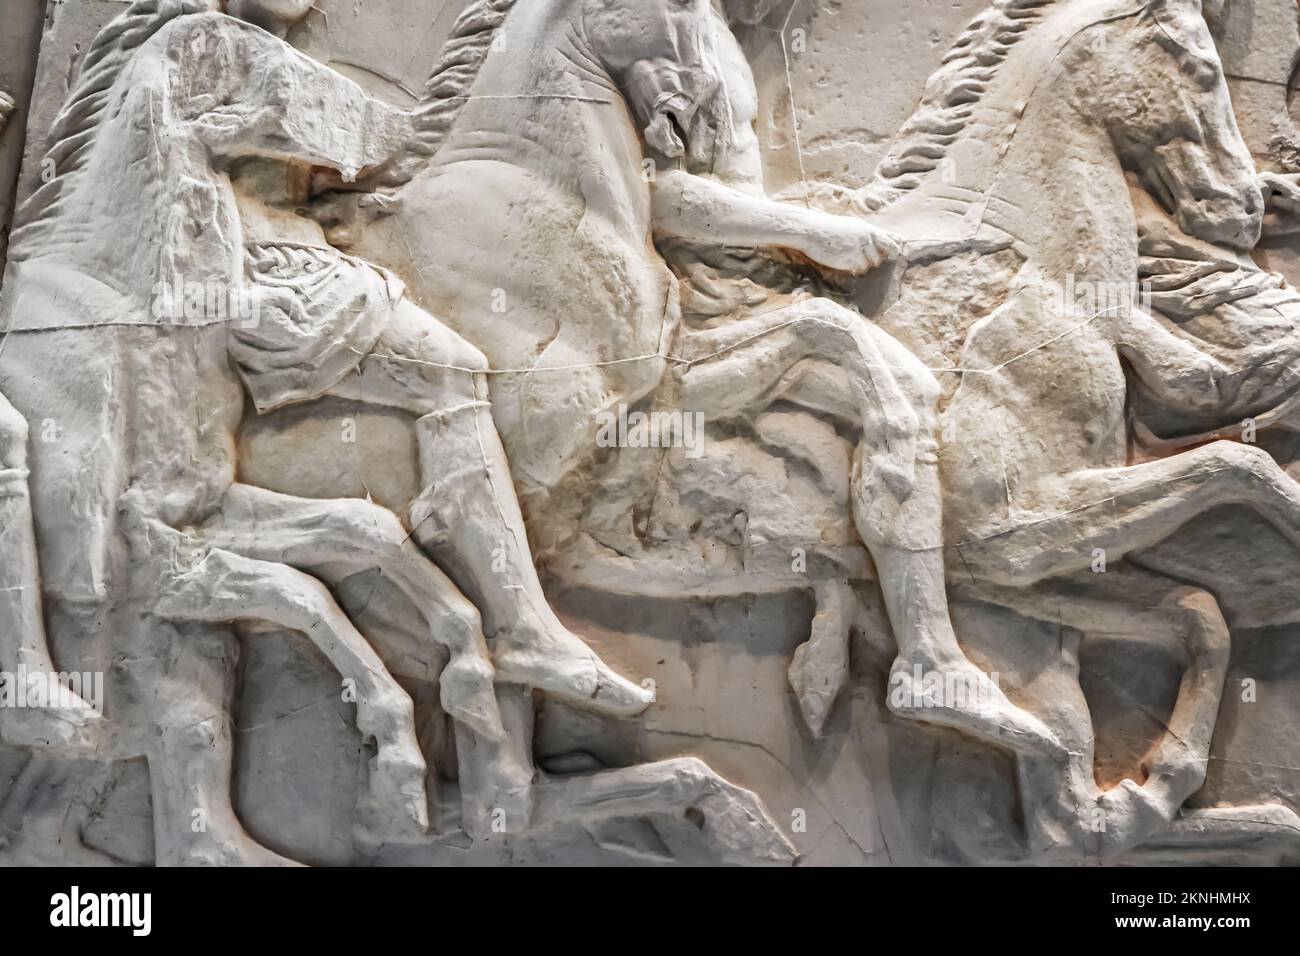 Background of horses in battle - cracked and mended white marble ancient bas relief sculptures from Greece Stock Photo